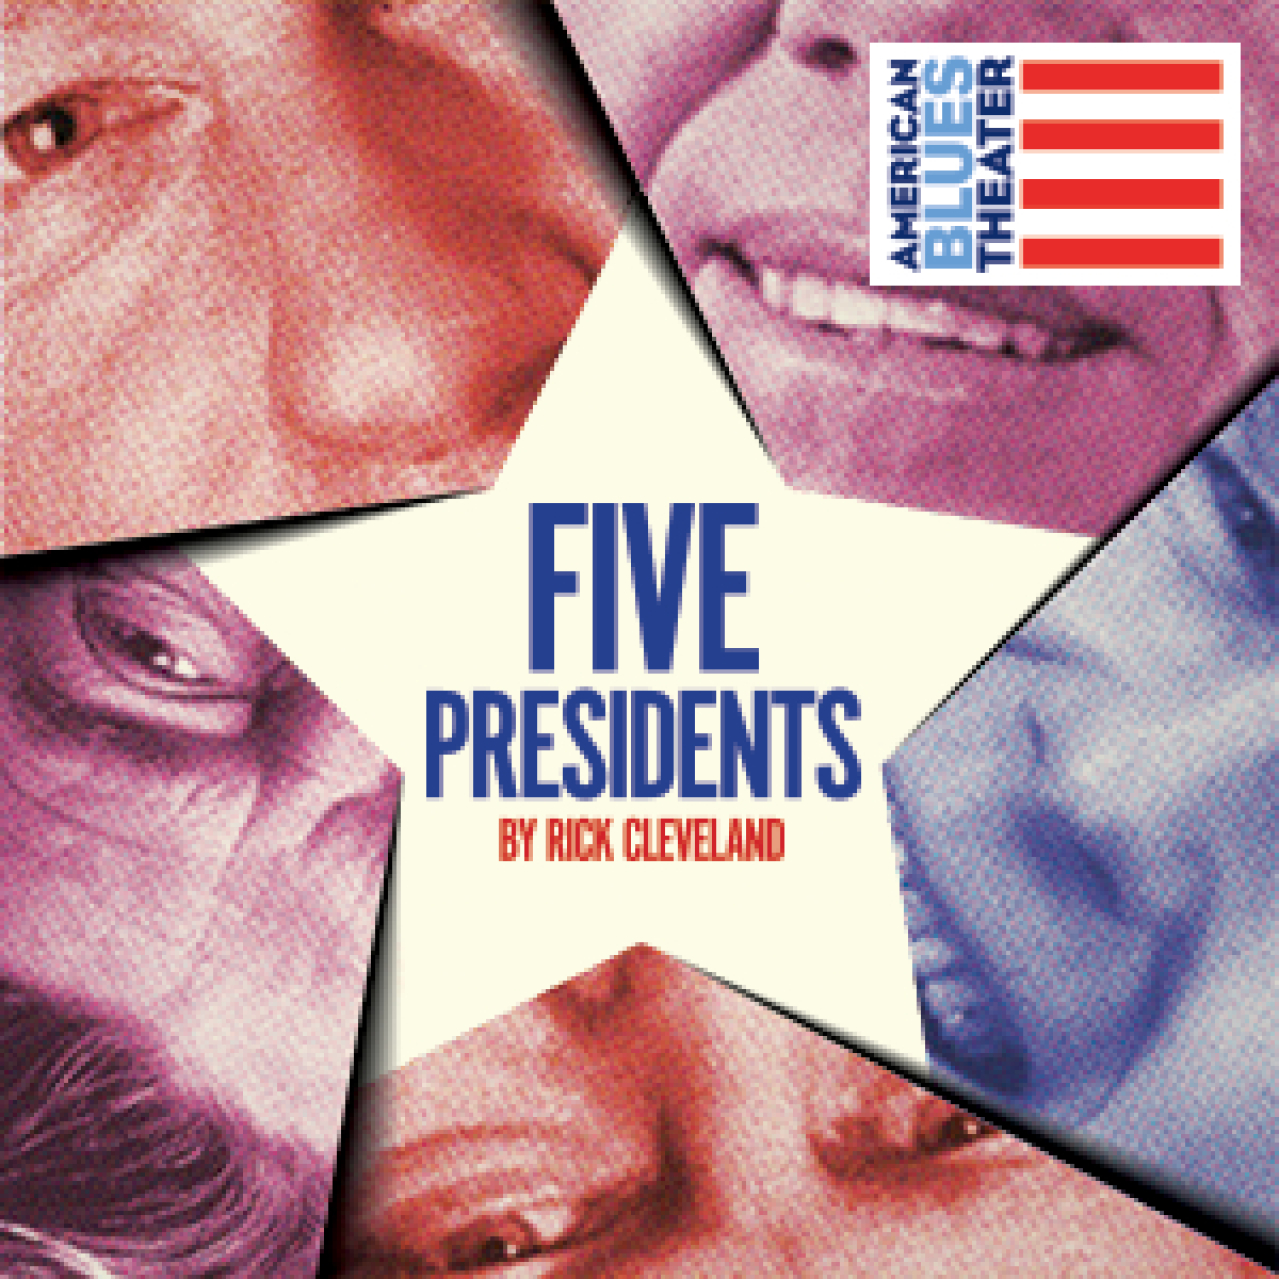 five presidents logo Broadway shows and tickets